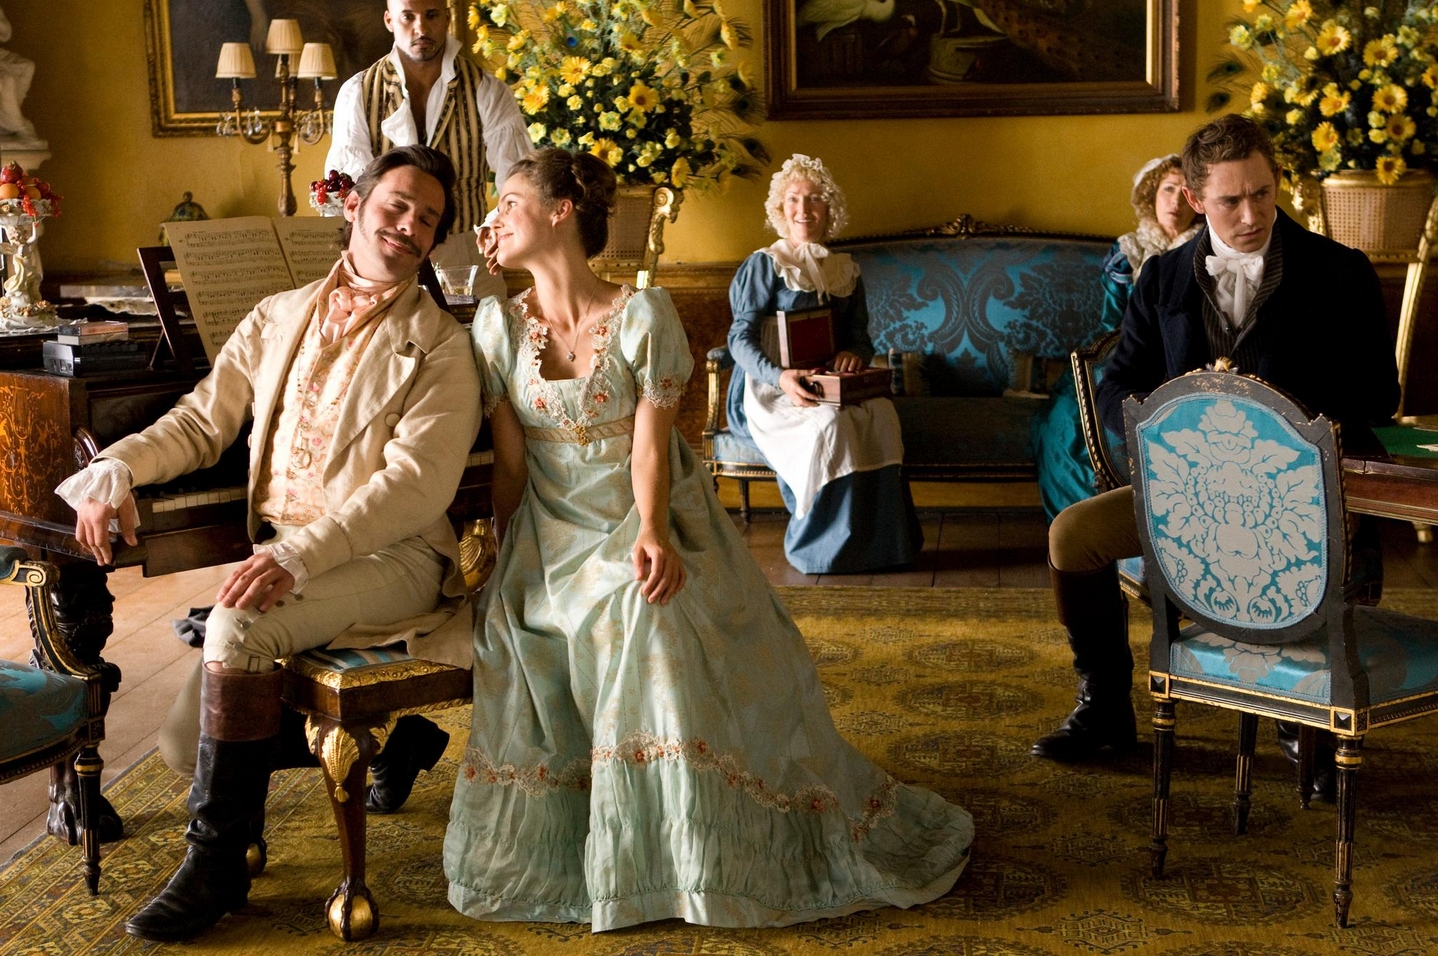 Austenland Movie Review Thoughts On Film.